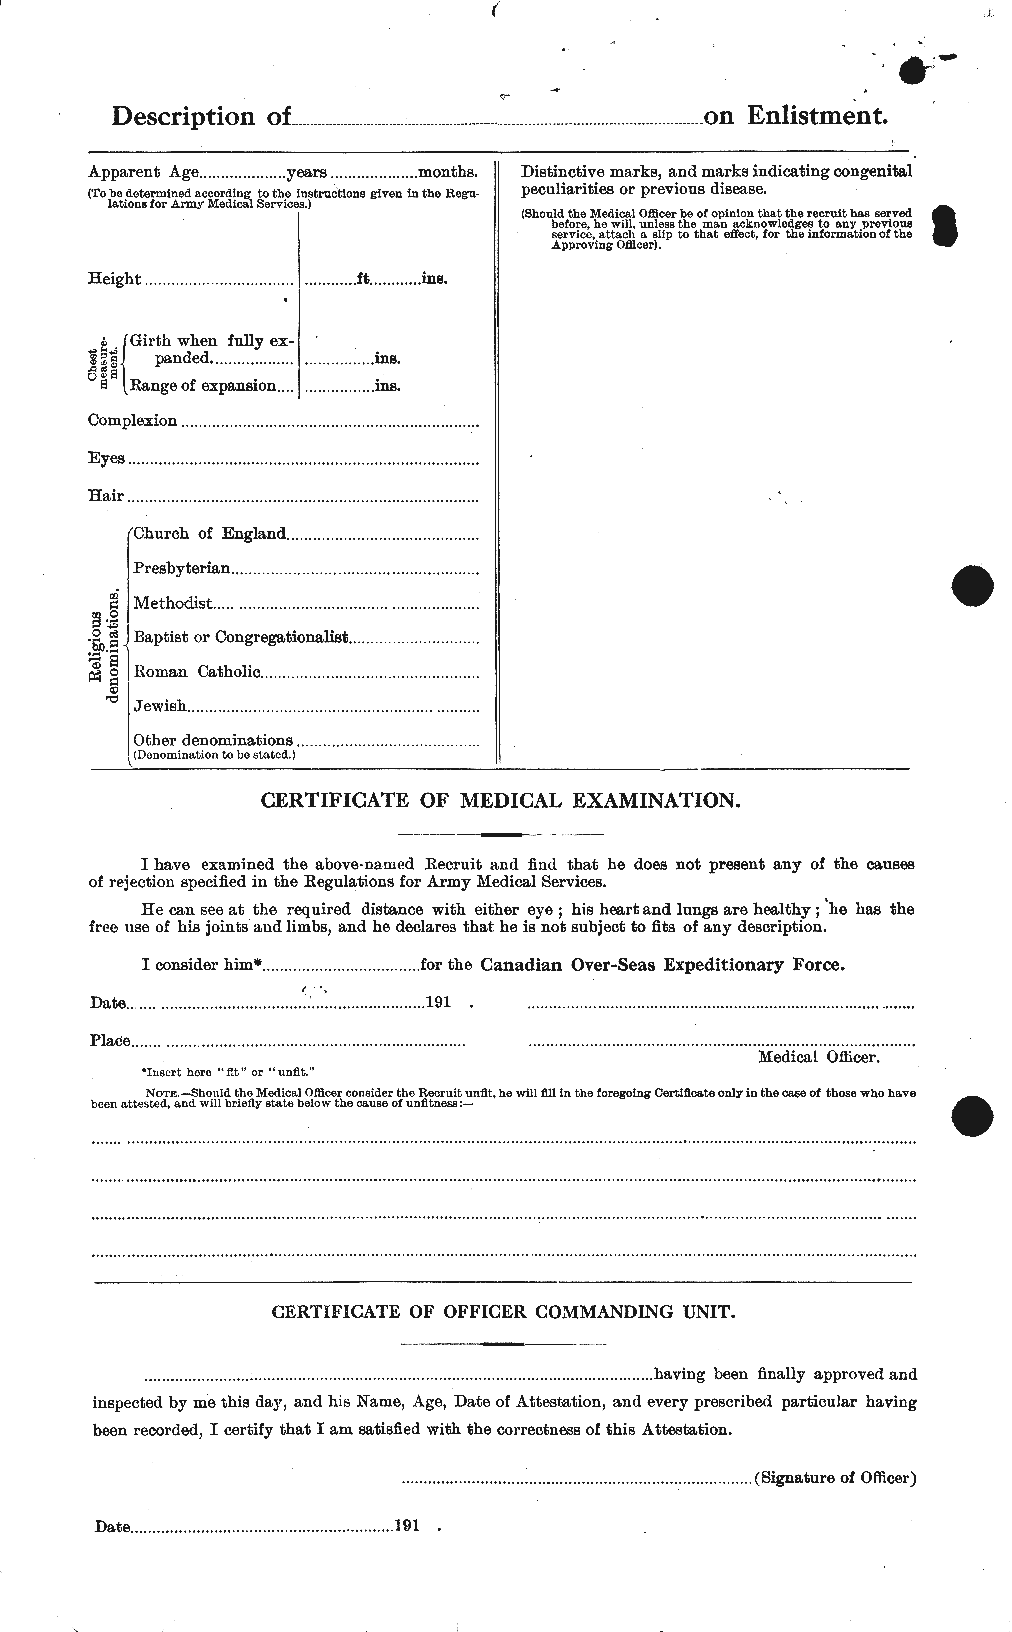 Personnel Records of the First World War - CEF 564944b